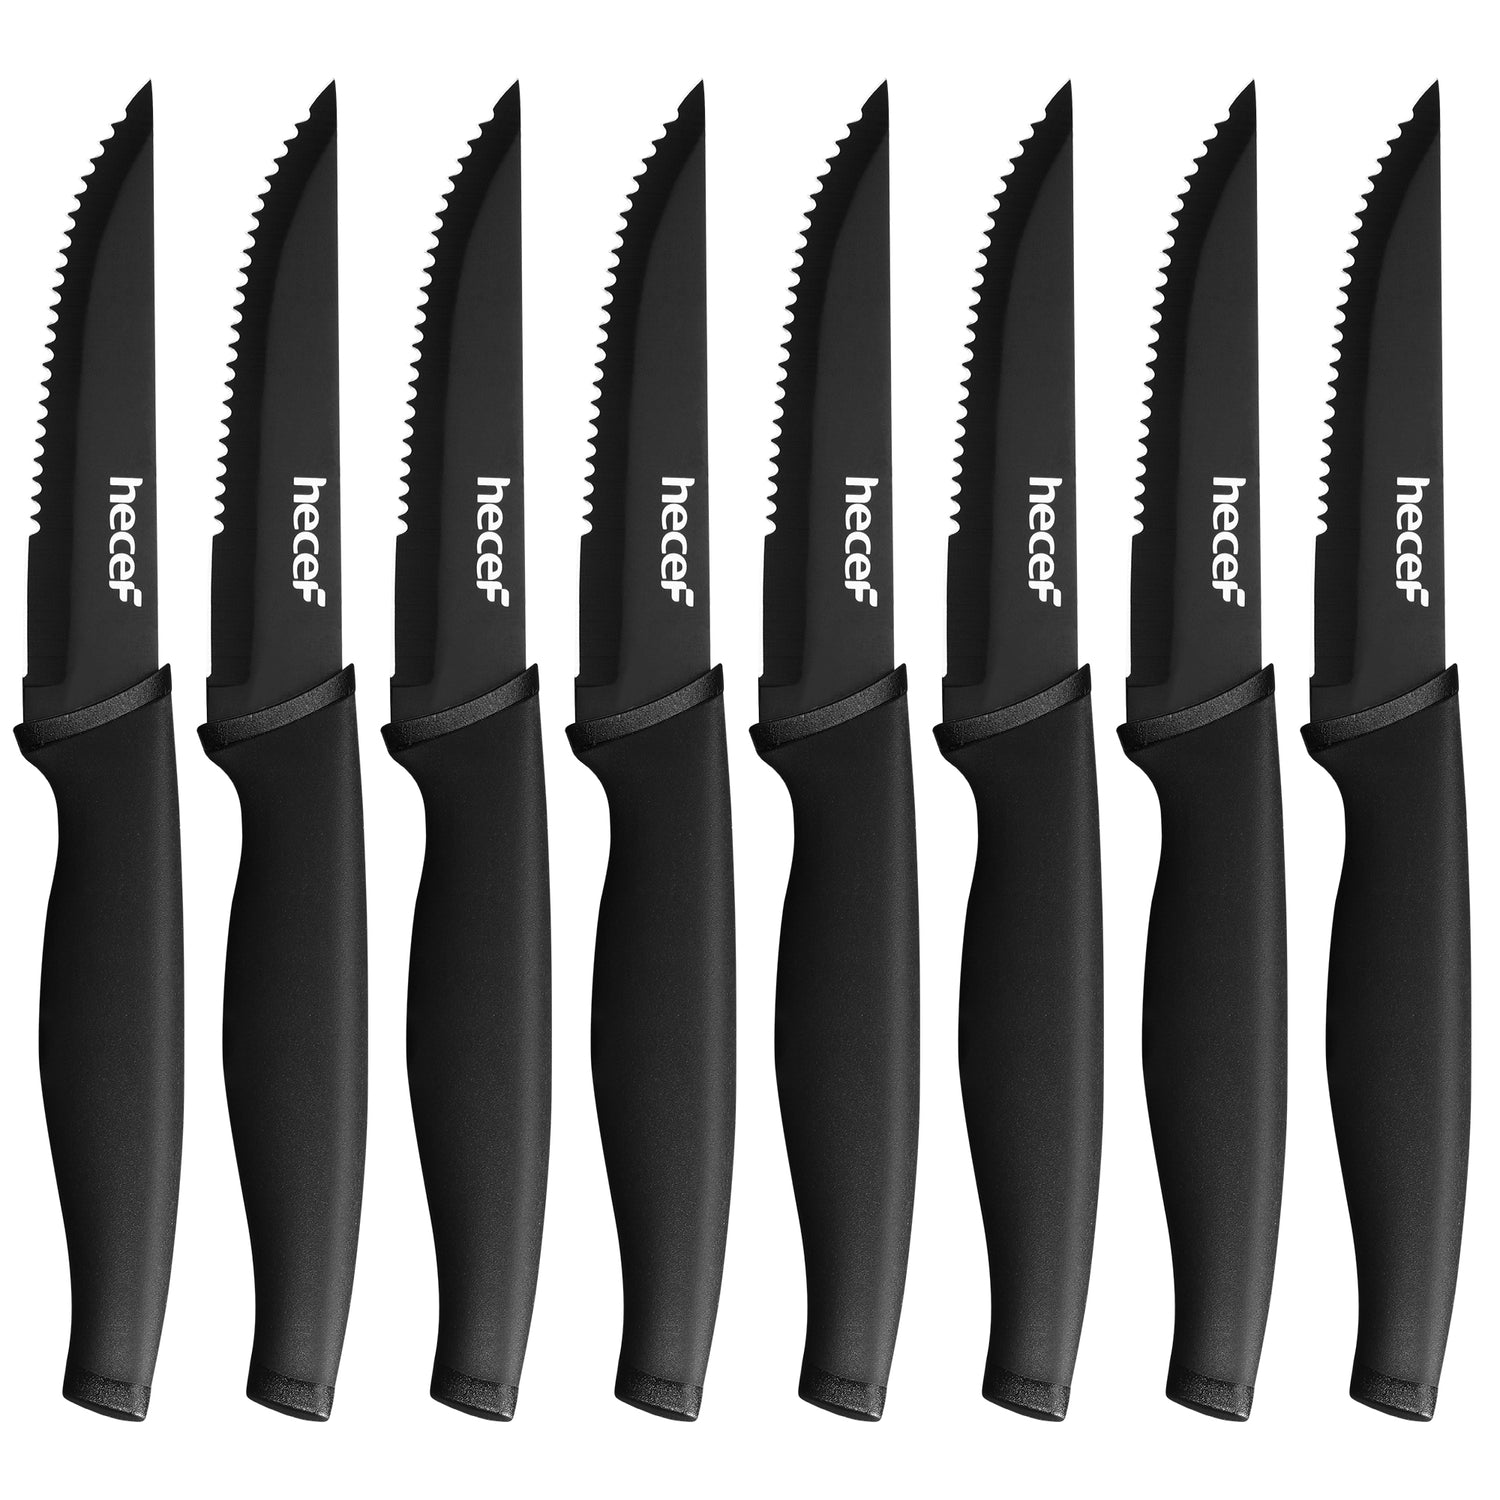 Hecef 11-Piece Kitchen Knife Set, High Carbon Stainless Steel Ultra Sharp Camping Knife with Oxford Cloth Roll Bag, Size: 8, Silver